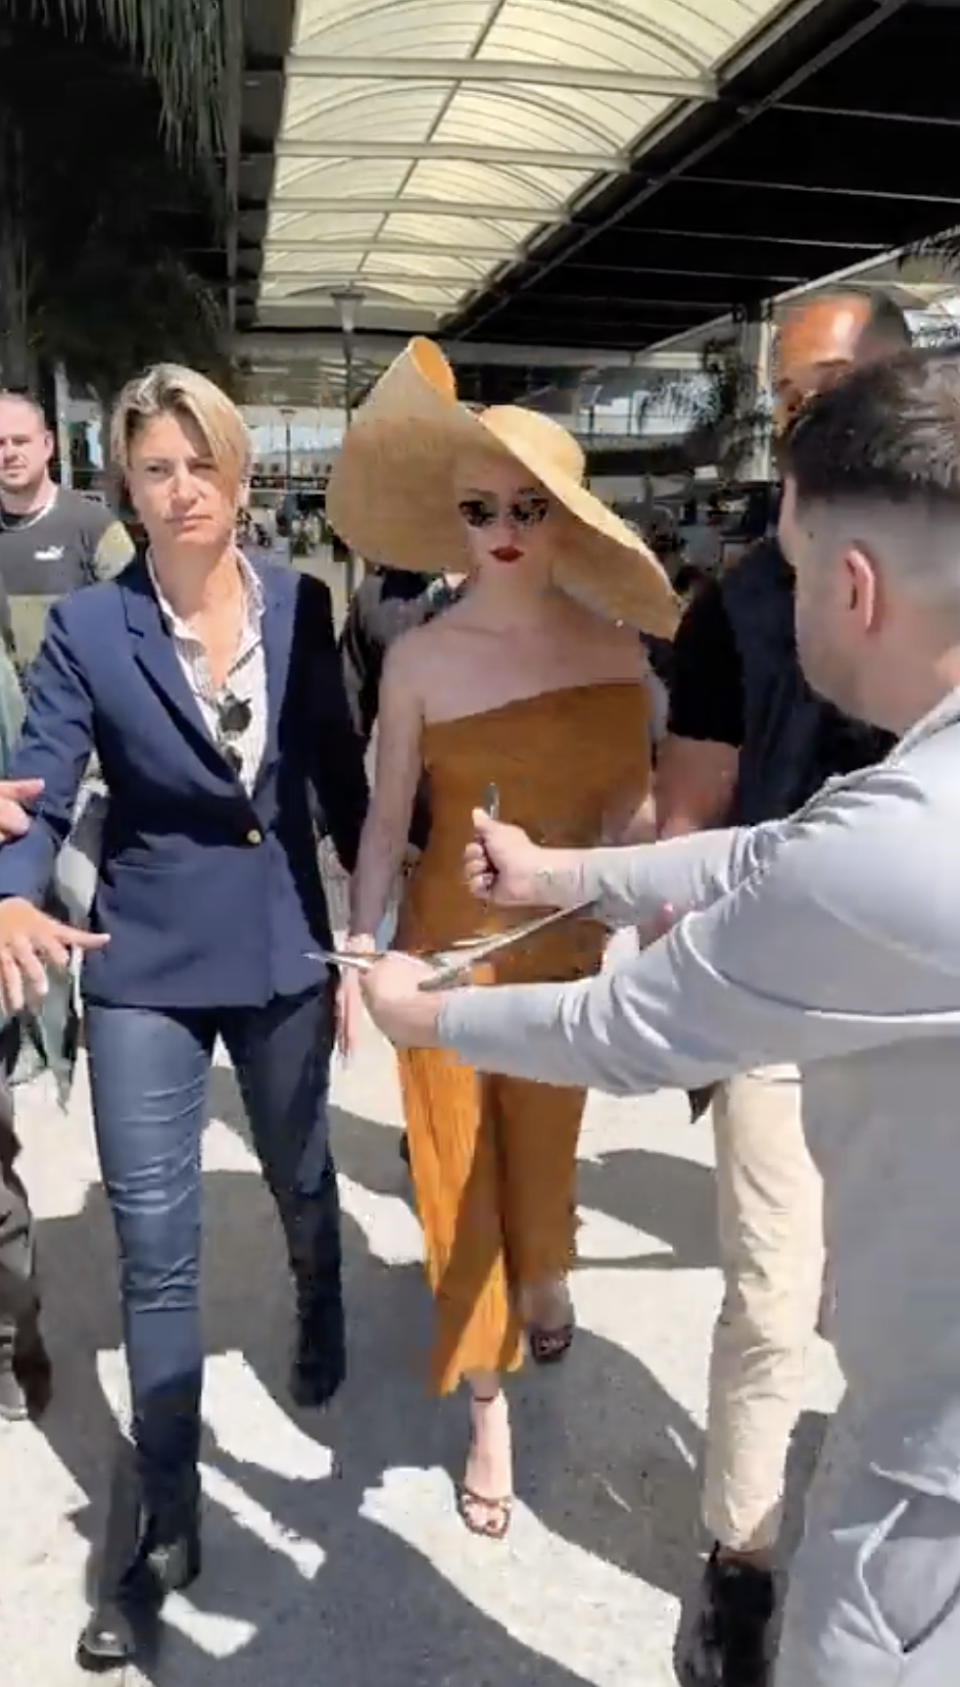 Anya Taylor-Joy is seen walking with several people. She is wearing a large wide-brimmed hat and an off-shoulder jumpsuit. Security and onlookers surround her